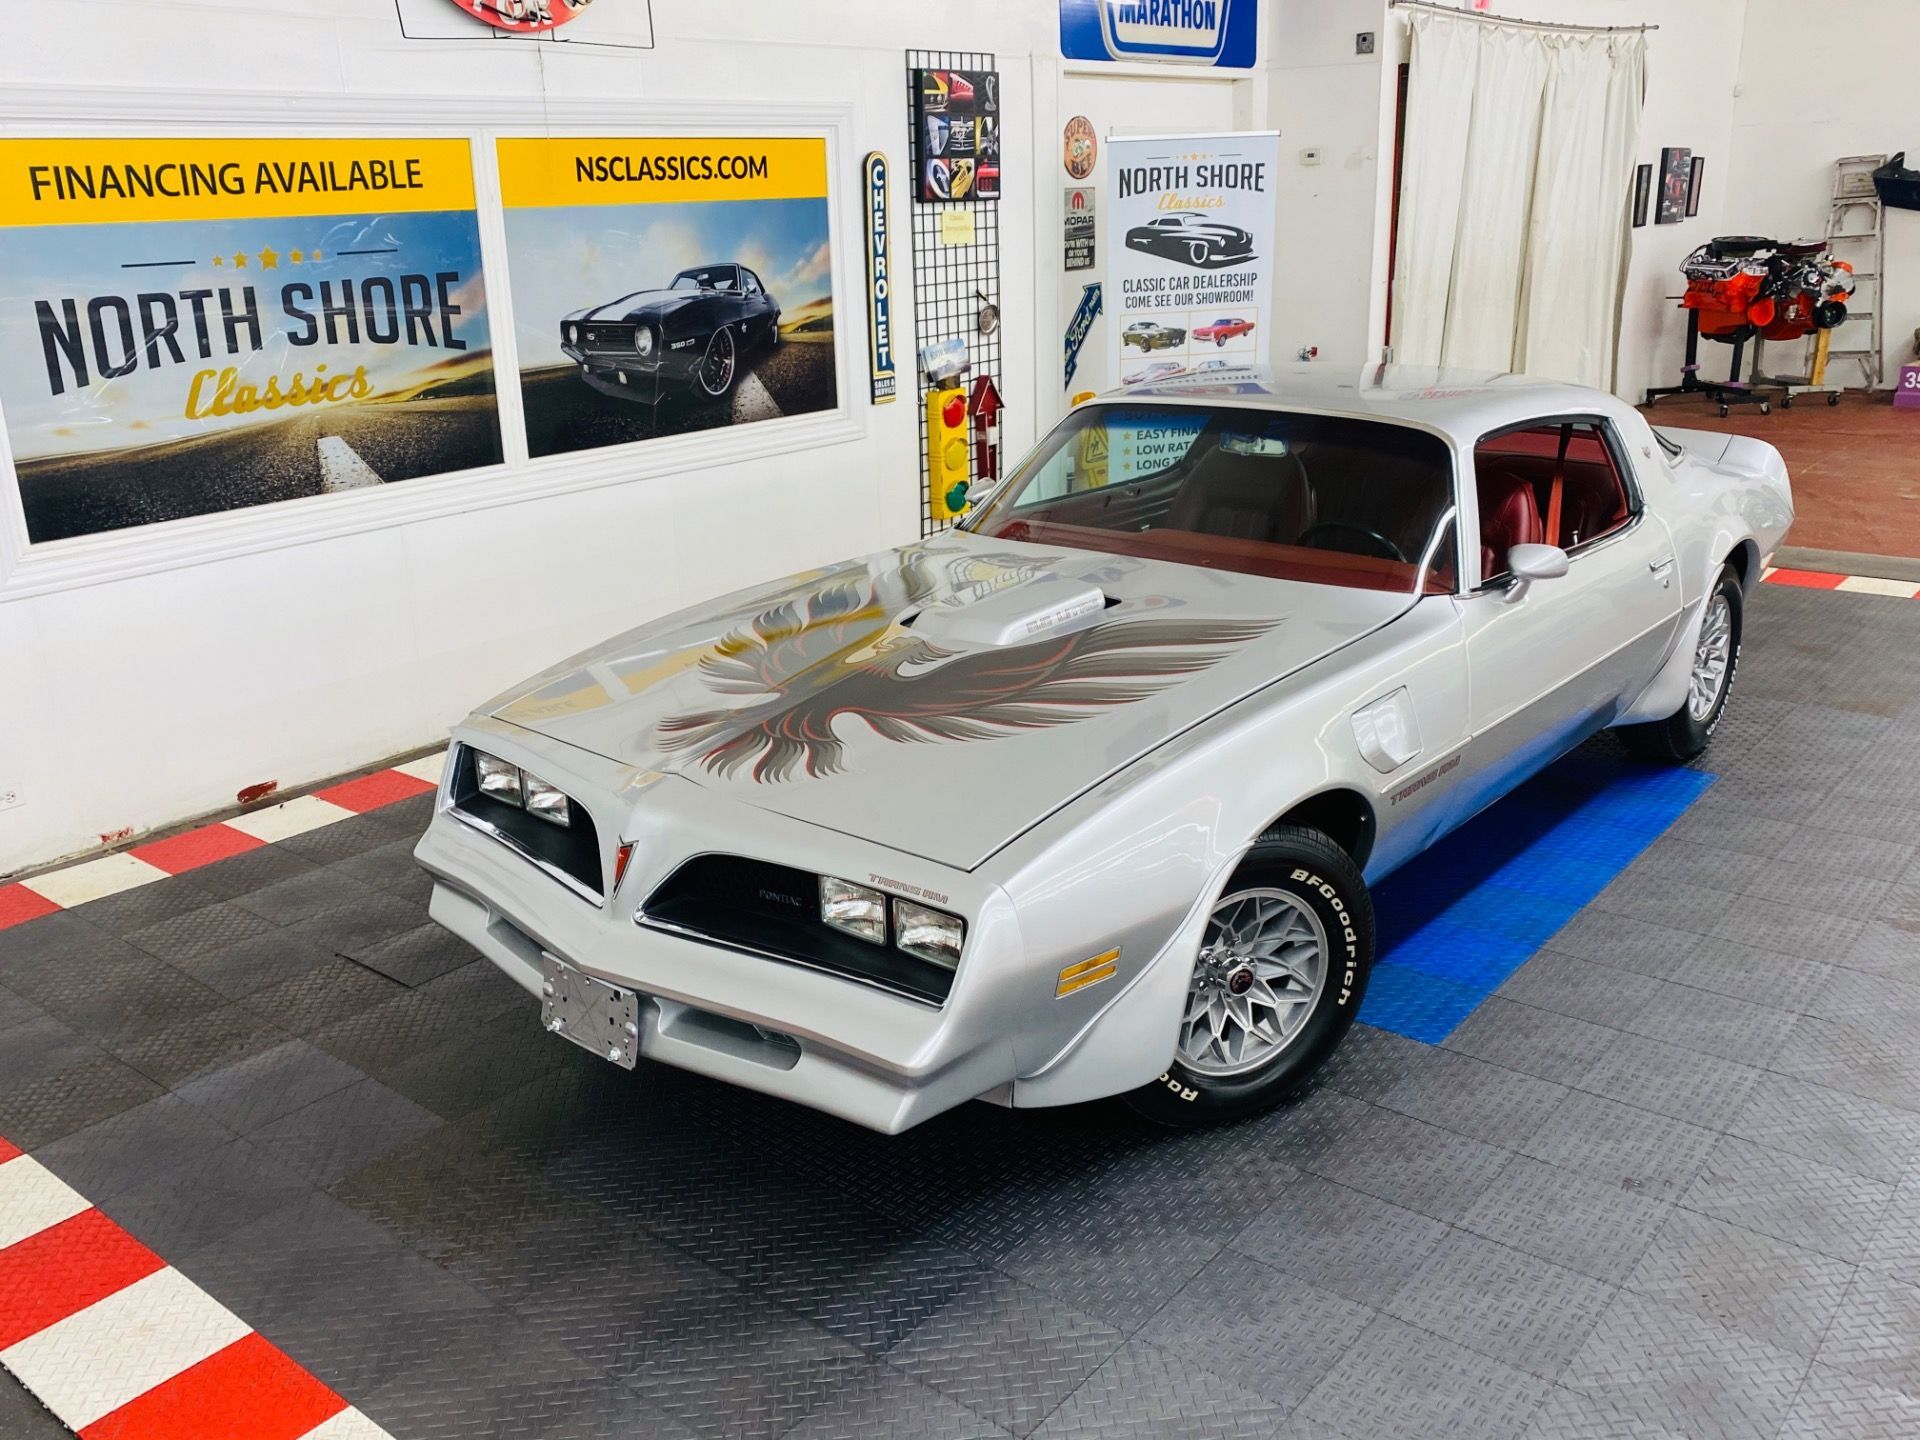 the Pontiac Trans AM sold like crazy after the Smokey and the Bandit Debute